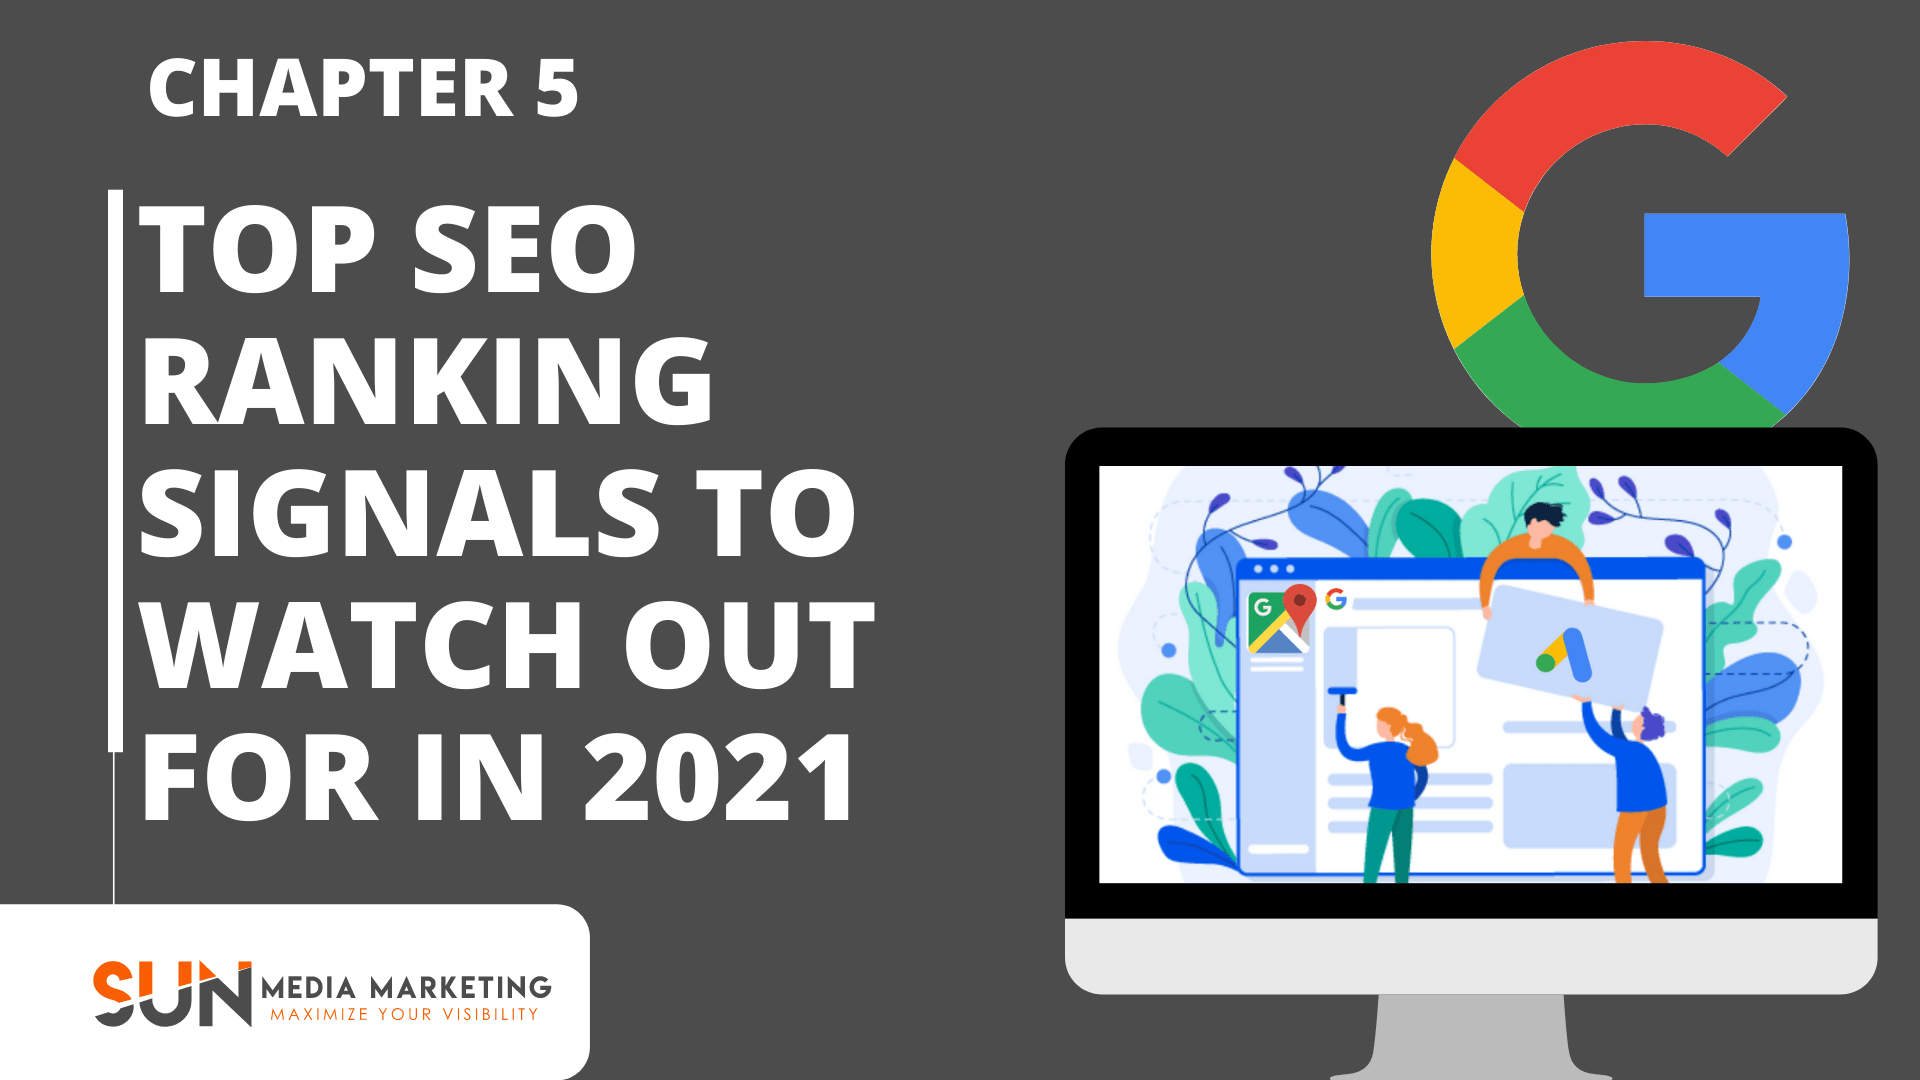 Top SEO Ranking Signals to Watch Out For in 2021